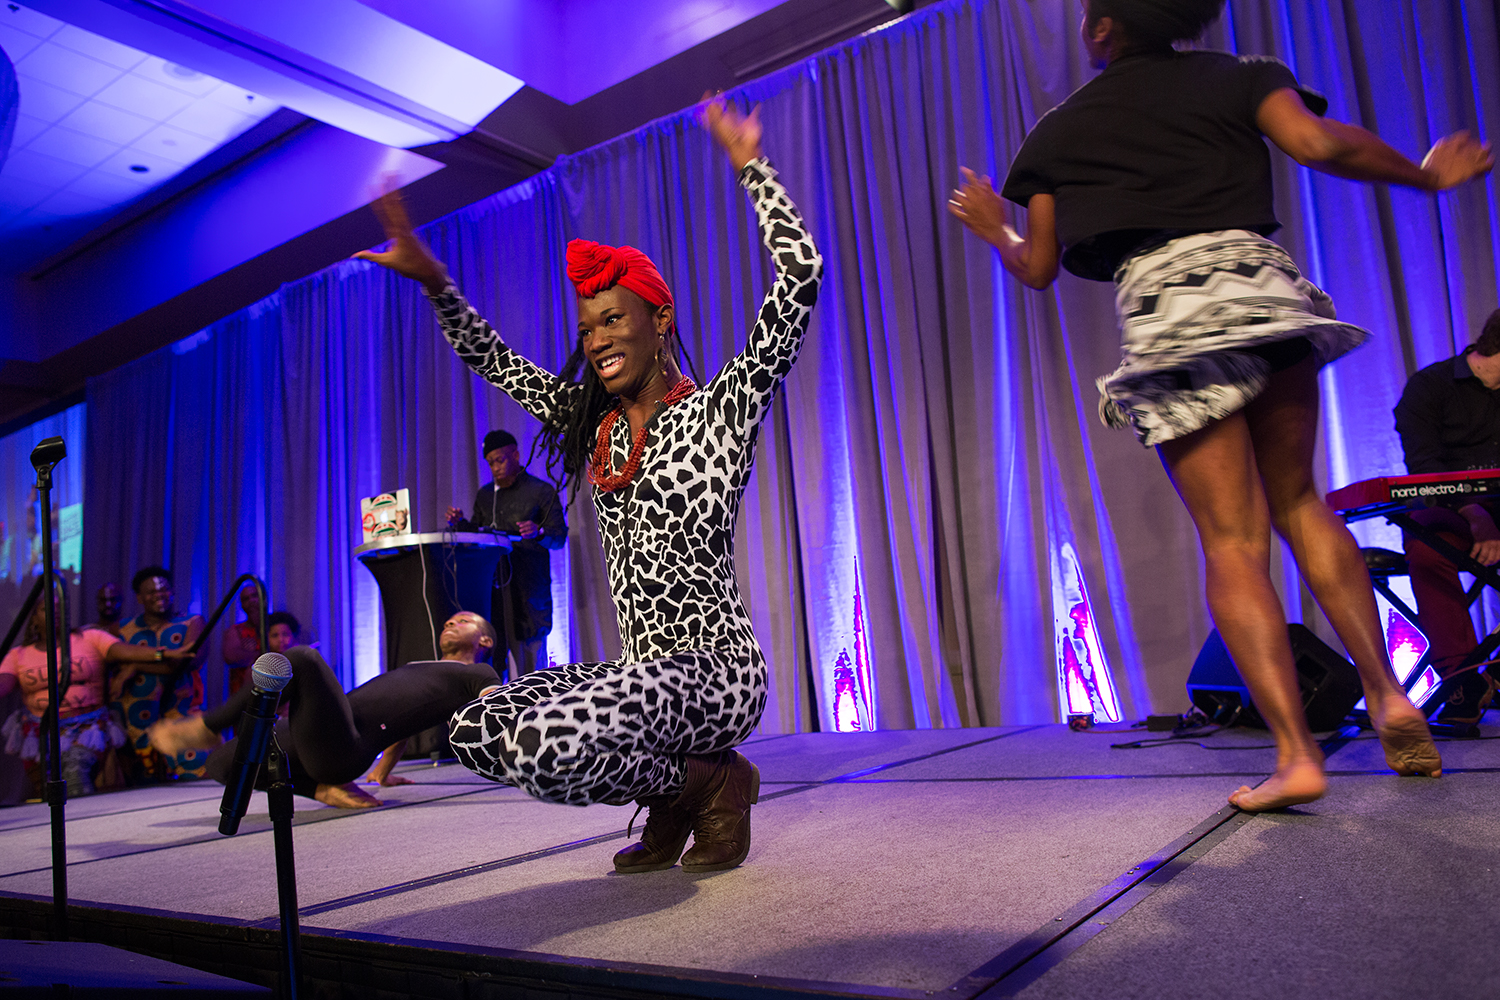  Micky B vogues during a performance on the opening night of the Facing Race 2016 racial justice conference, Atlanta, GA, 10 November 